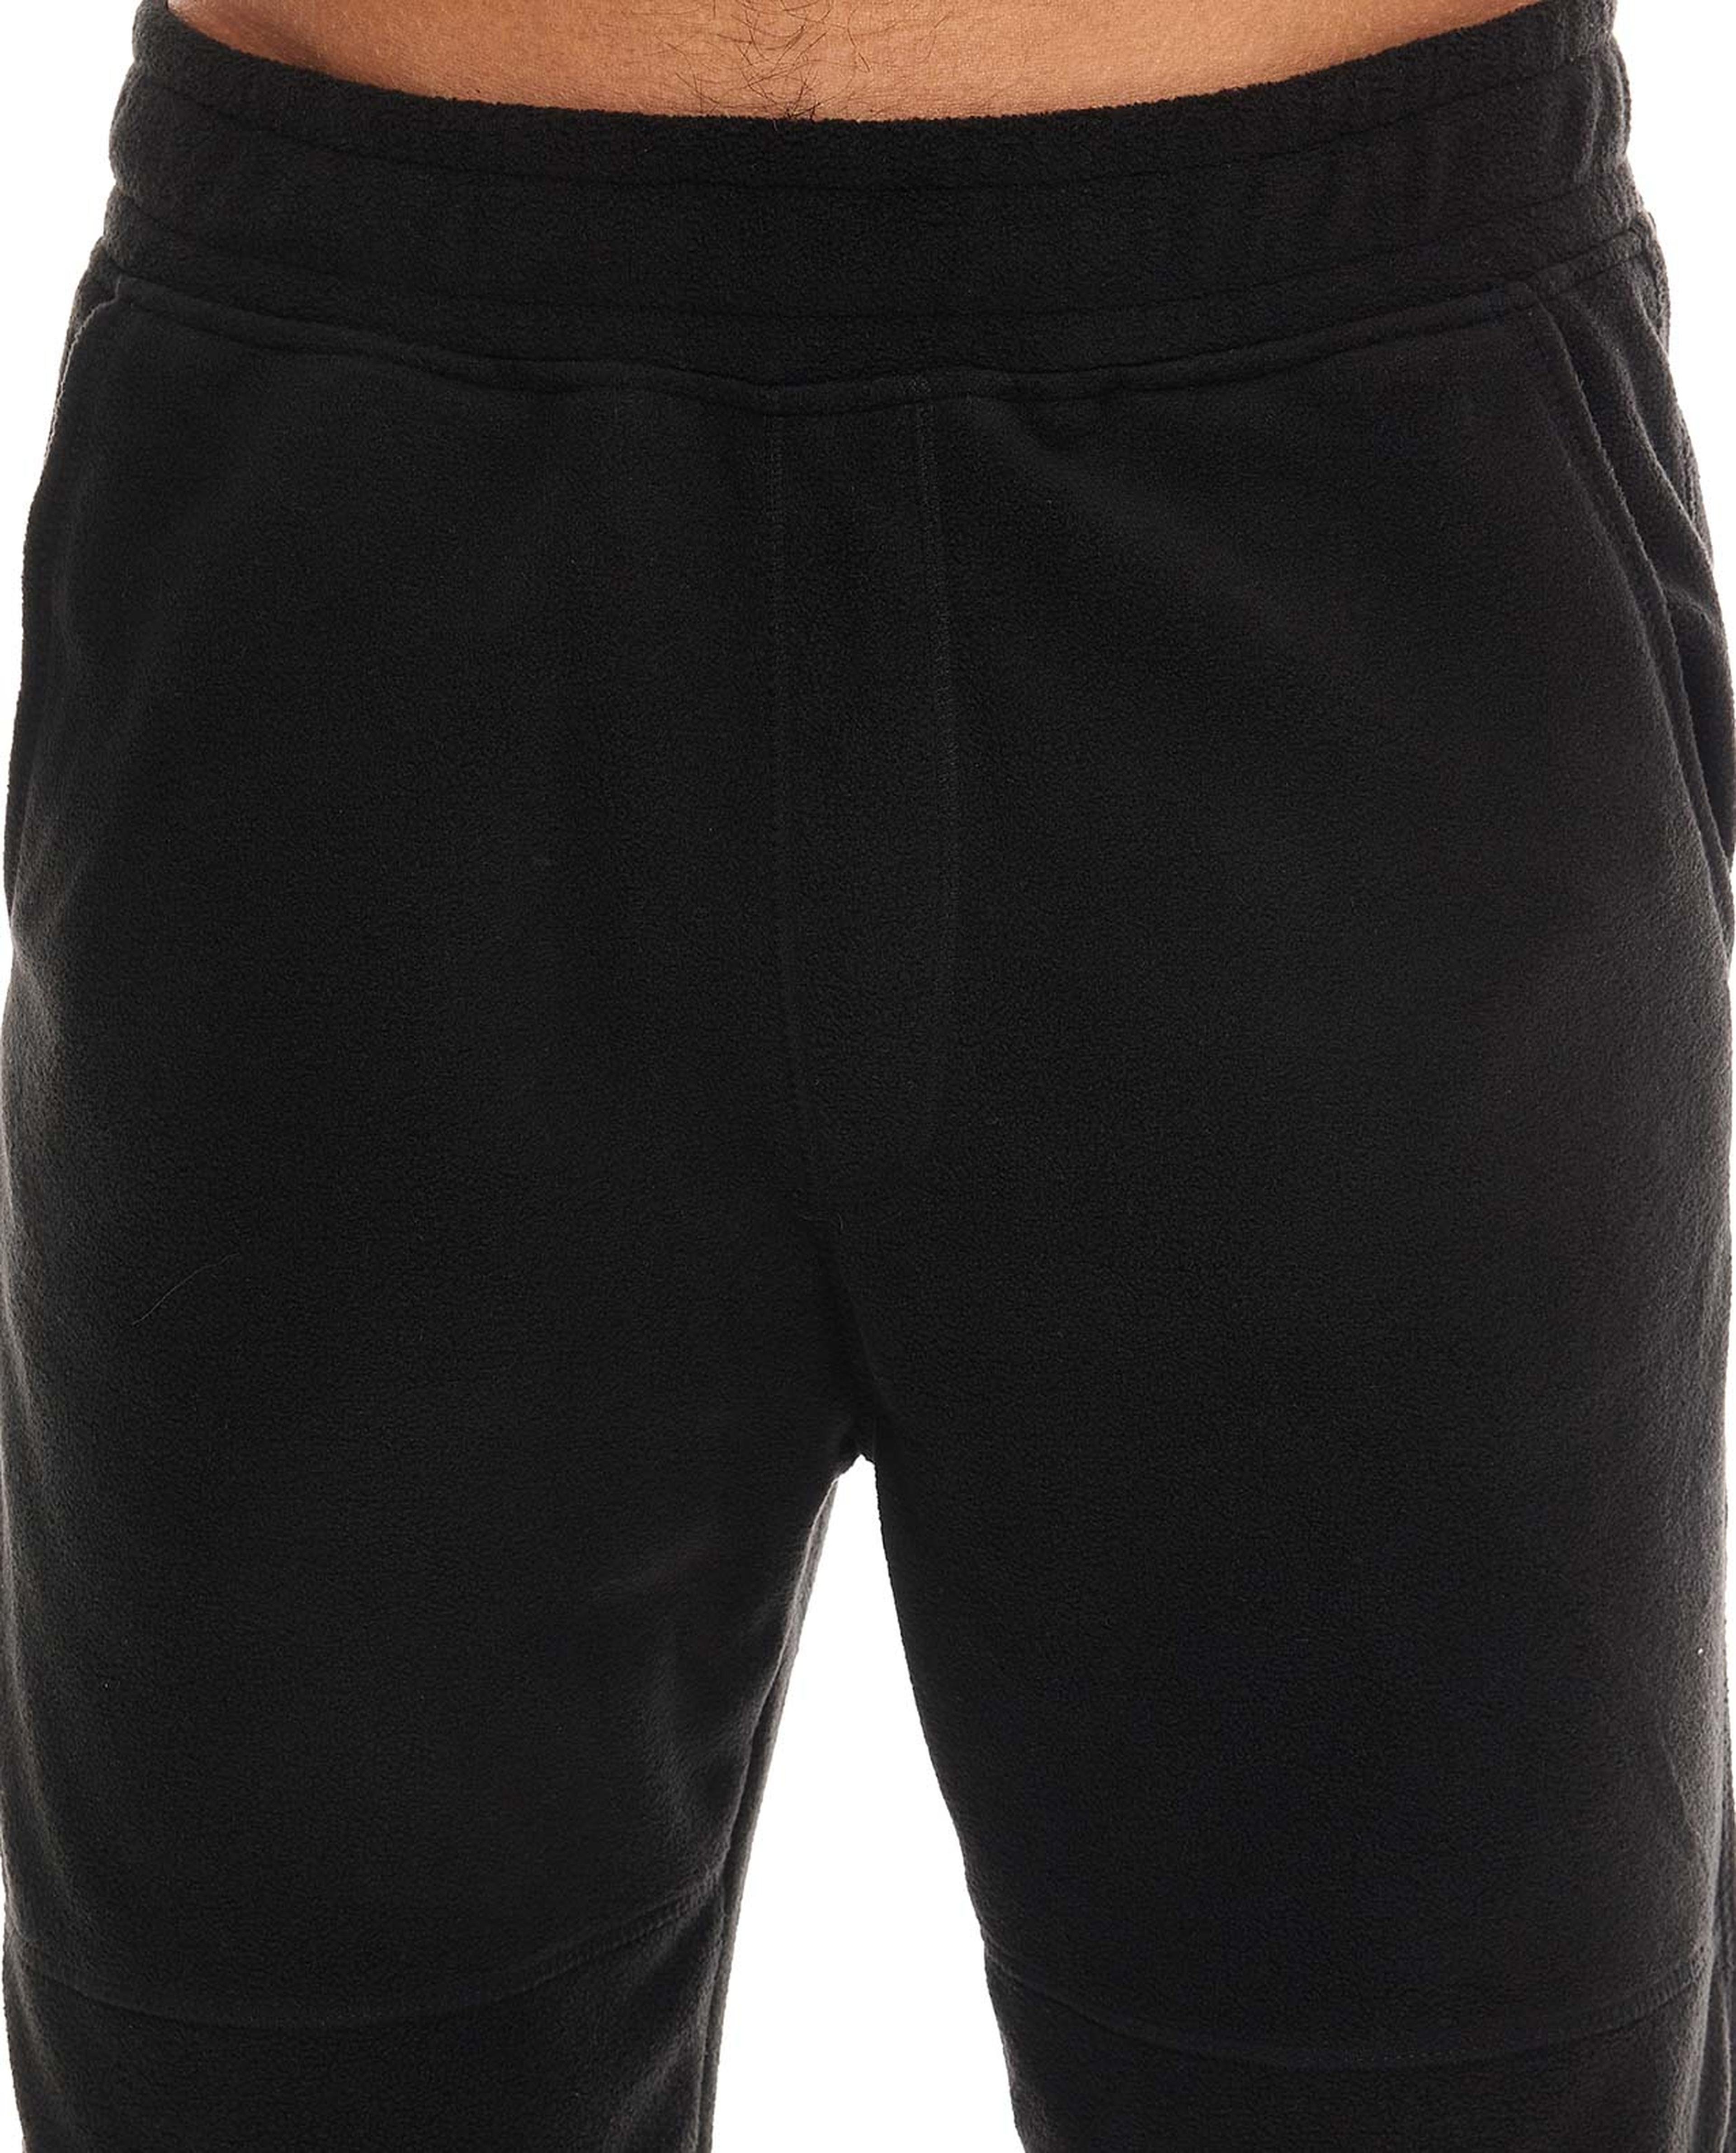 Solid Sweatpants with Elasticated Waist